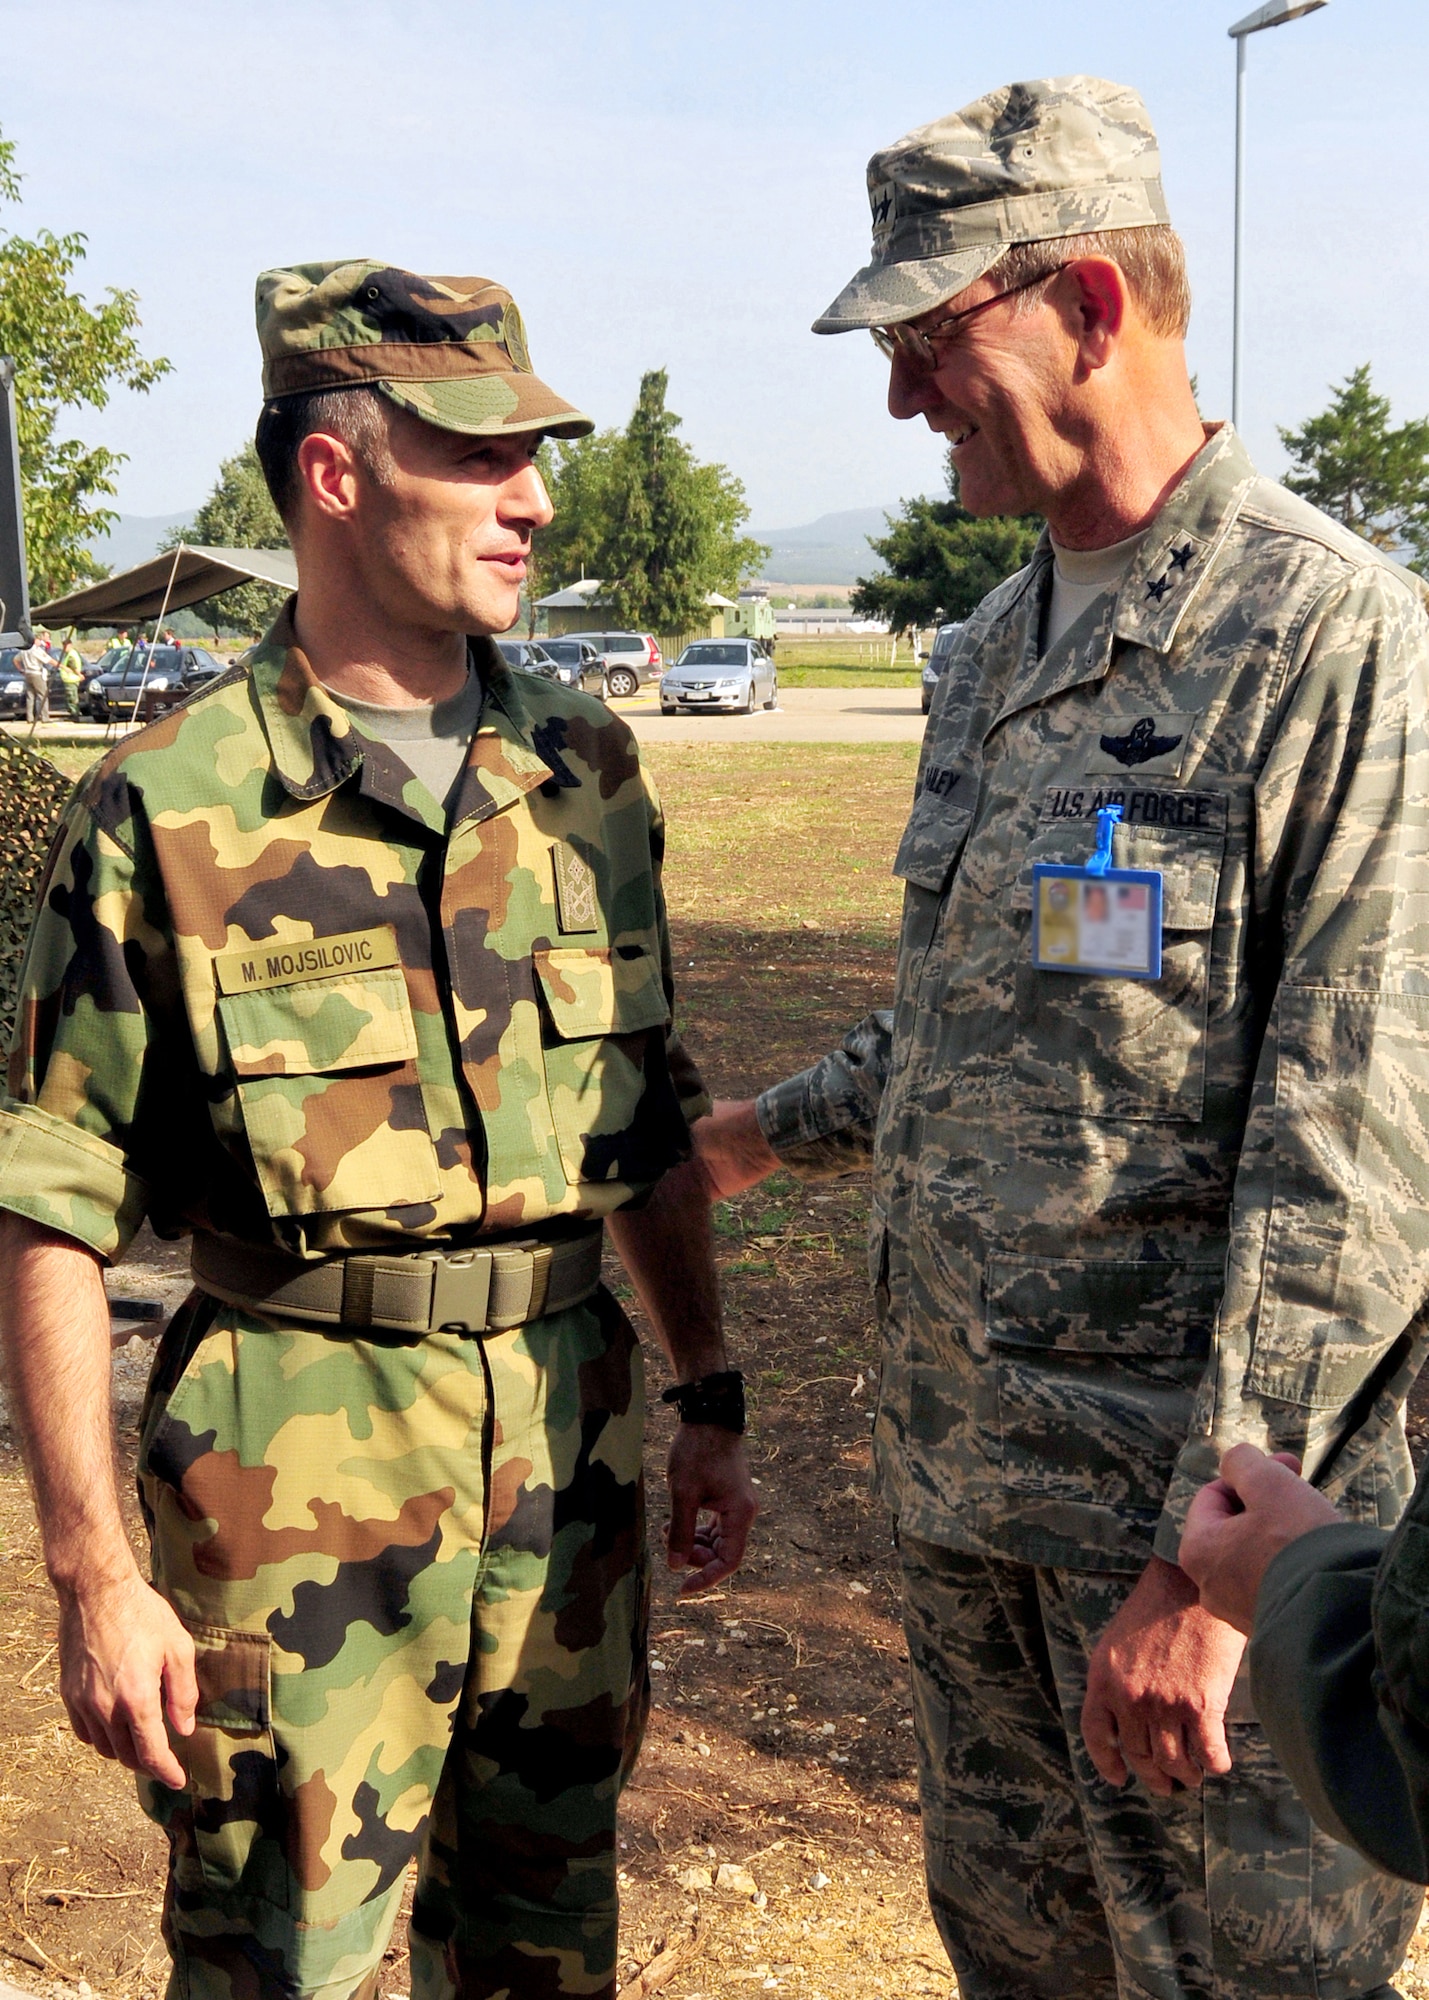 Serbian Brig. Gen. Milan Mojsilovic, leader of the MEDCEUR 2009 Host Nation Planning and Execution Team, greets Maj. Gen. Robert Bailey, Air National Guard Assistant to the Commander, U.S. Air Forces in Europe, as part of the MEDCEUR 09 distinguished visitors' day in Nis, Serbia, Sept. 10, 2009. MEDCEUR is an annual joint and combined medical exercise with a focus on major disaster response and mass casualty situations.  More than 700 exercise participants from 15 countries are taking part in this year’s exercise, which is hosted by Serbia. (U.S. Air Force photo by Staff Sgt. Markus M. Maier)